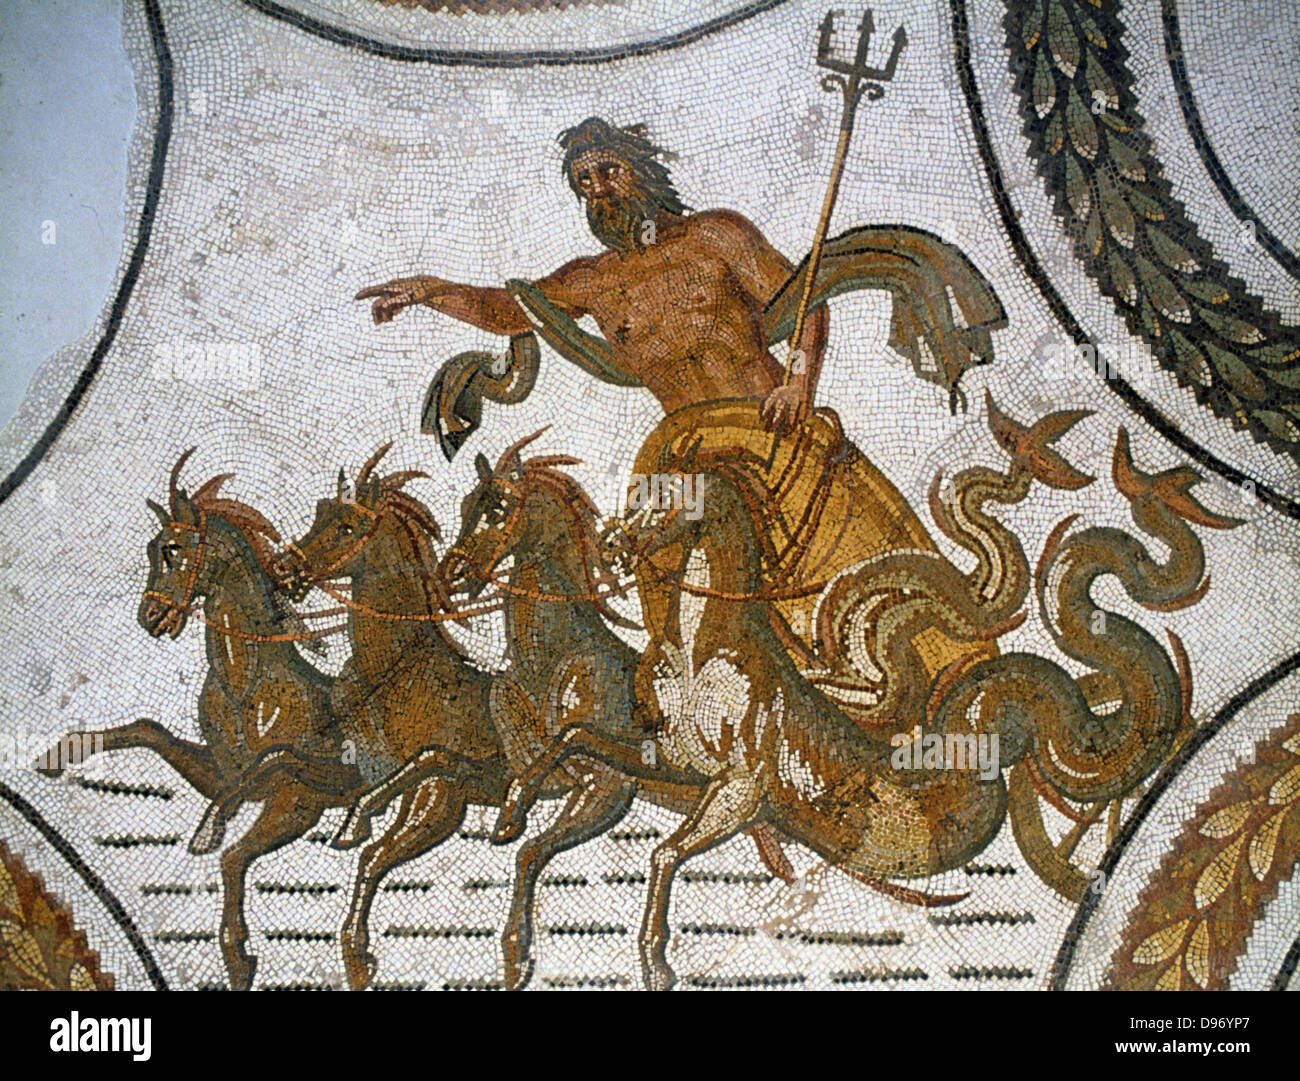 Triumph of Neptune. Neptune, Roman god of the sea (Greek: Poseidon) carrying his trident and riding in chariot pulled by horses with dolphin tails. 2nd century AD mosaic from Sousse (Susah). Bardo Museum, Tunis. Stock Photo